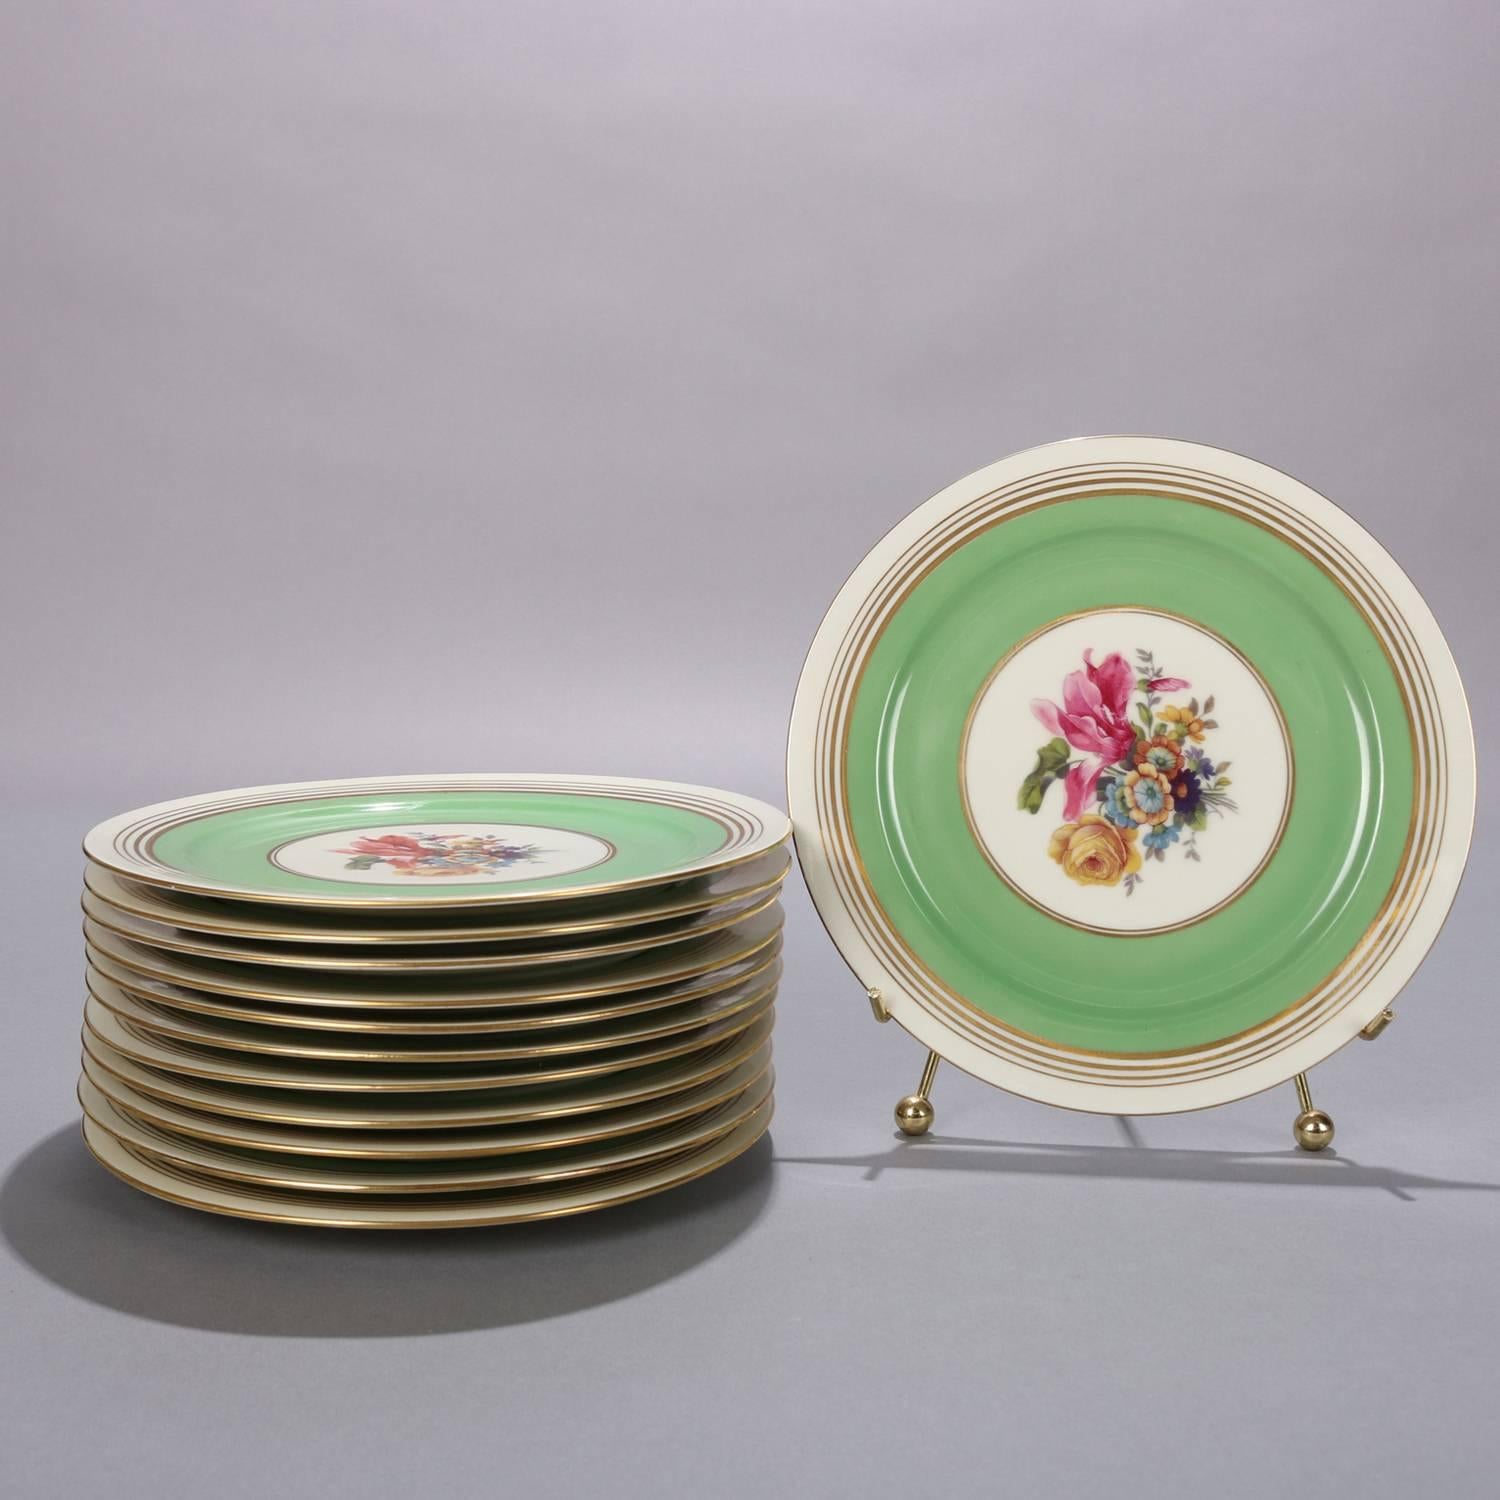 Set of 12 Dresden School Czech porcelain dinner plates by Puls feature green and gilt rim with central floral bouquet, en verso crown Puls mark, 20th century

Measures: .75